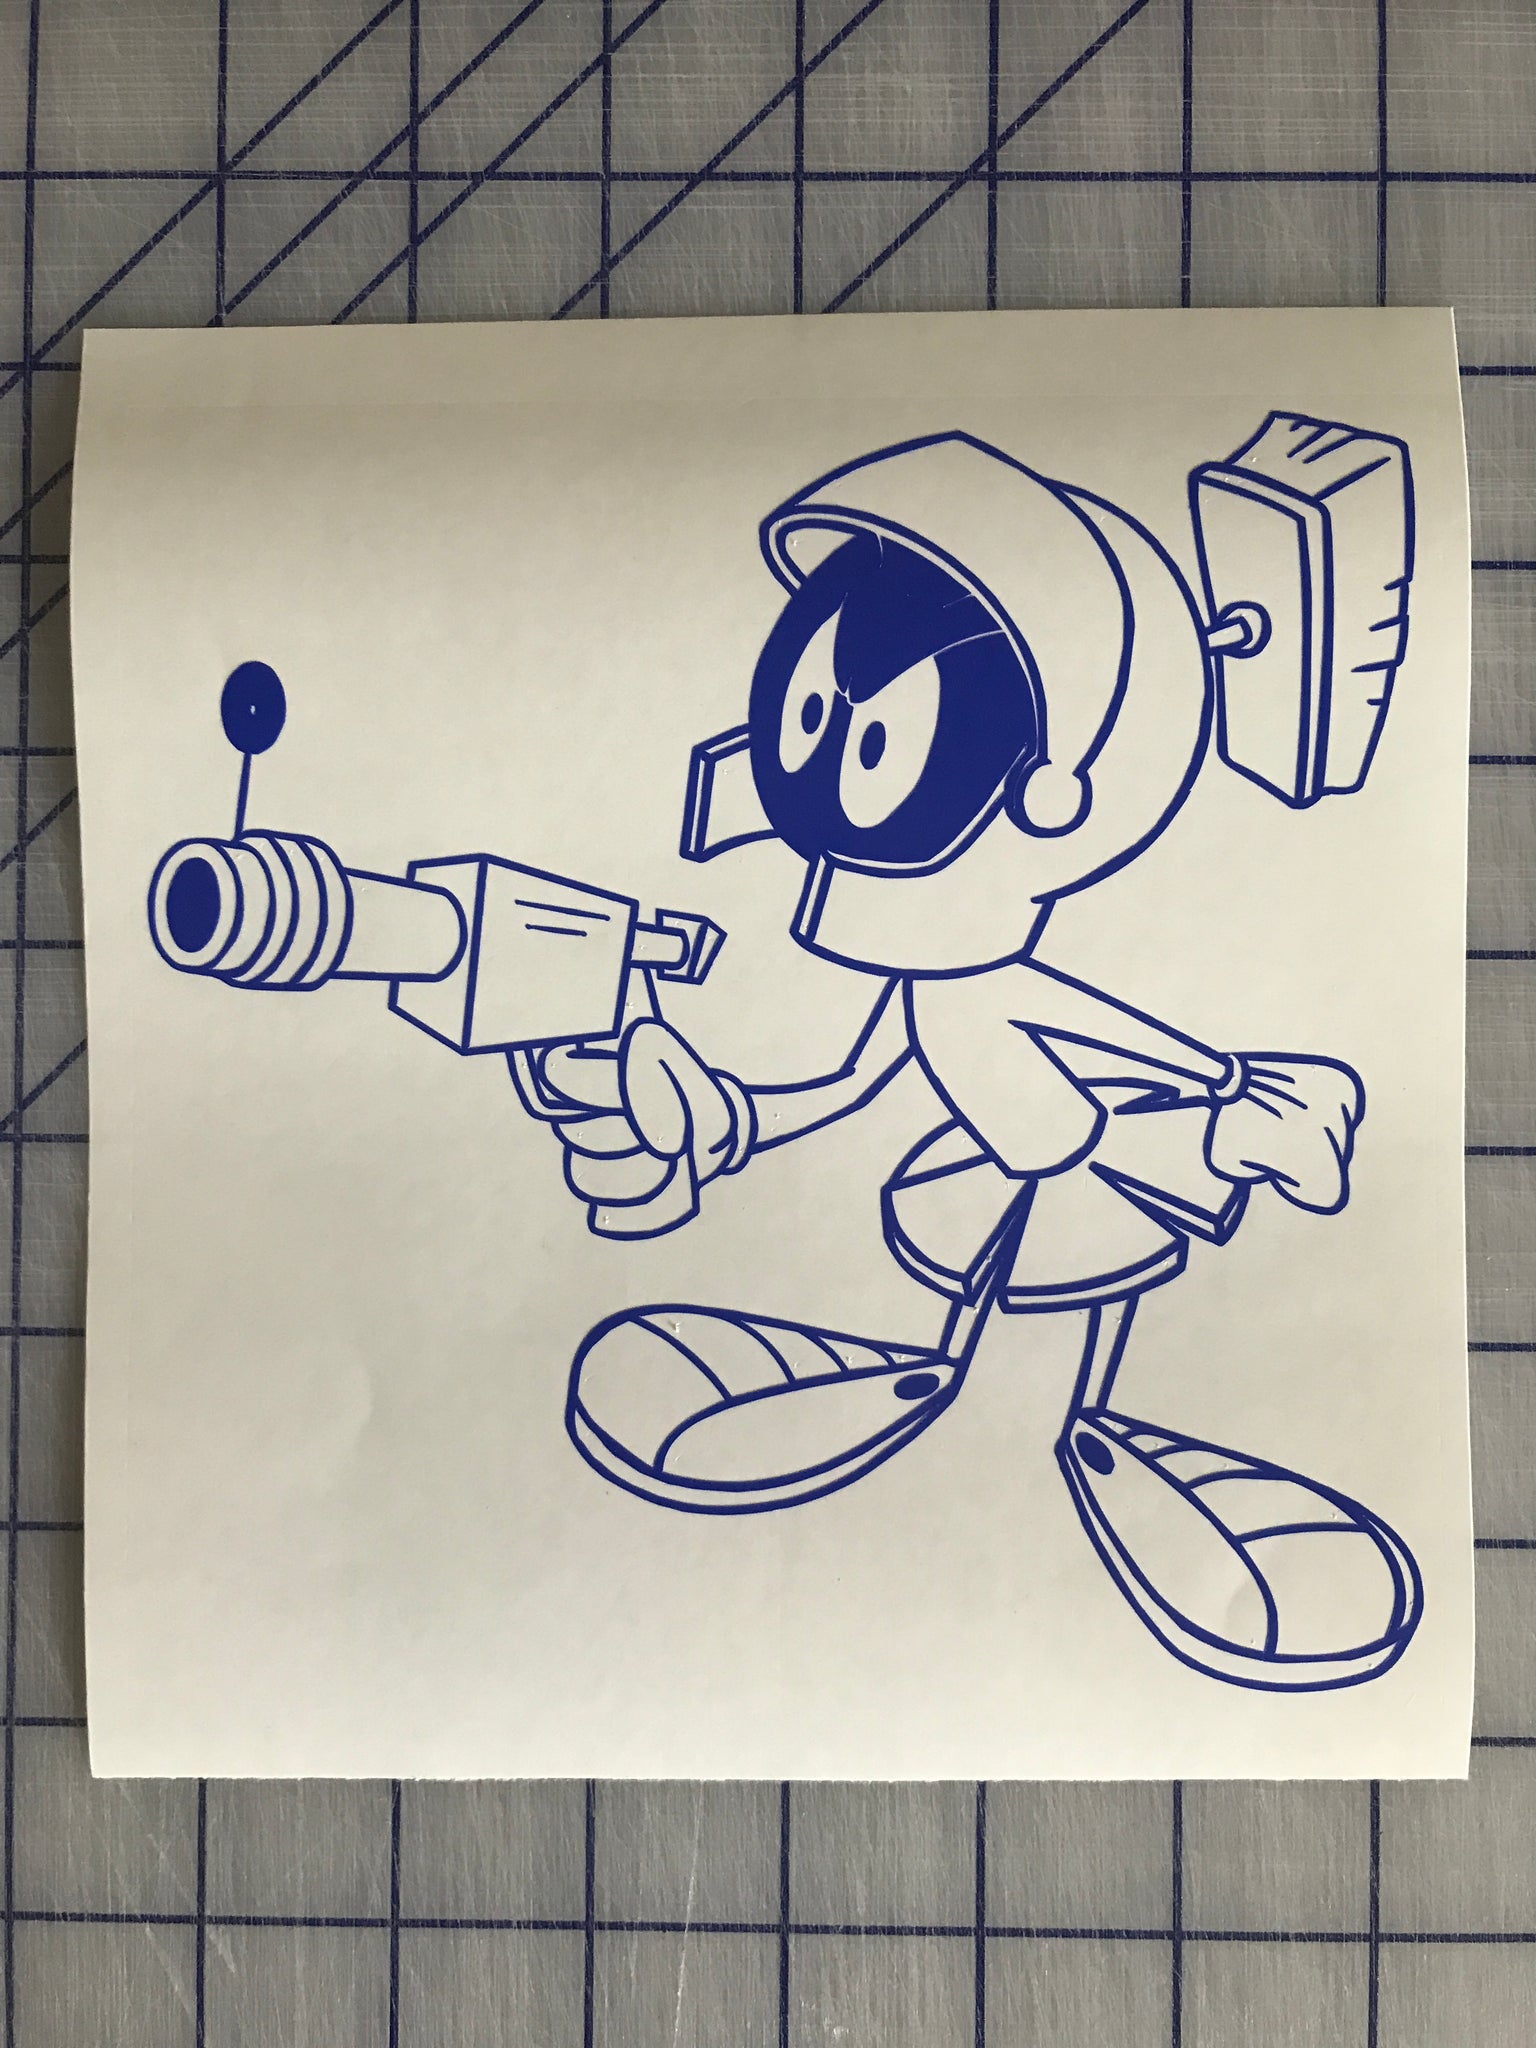 marvin the martian cannon